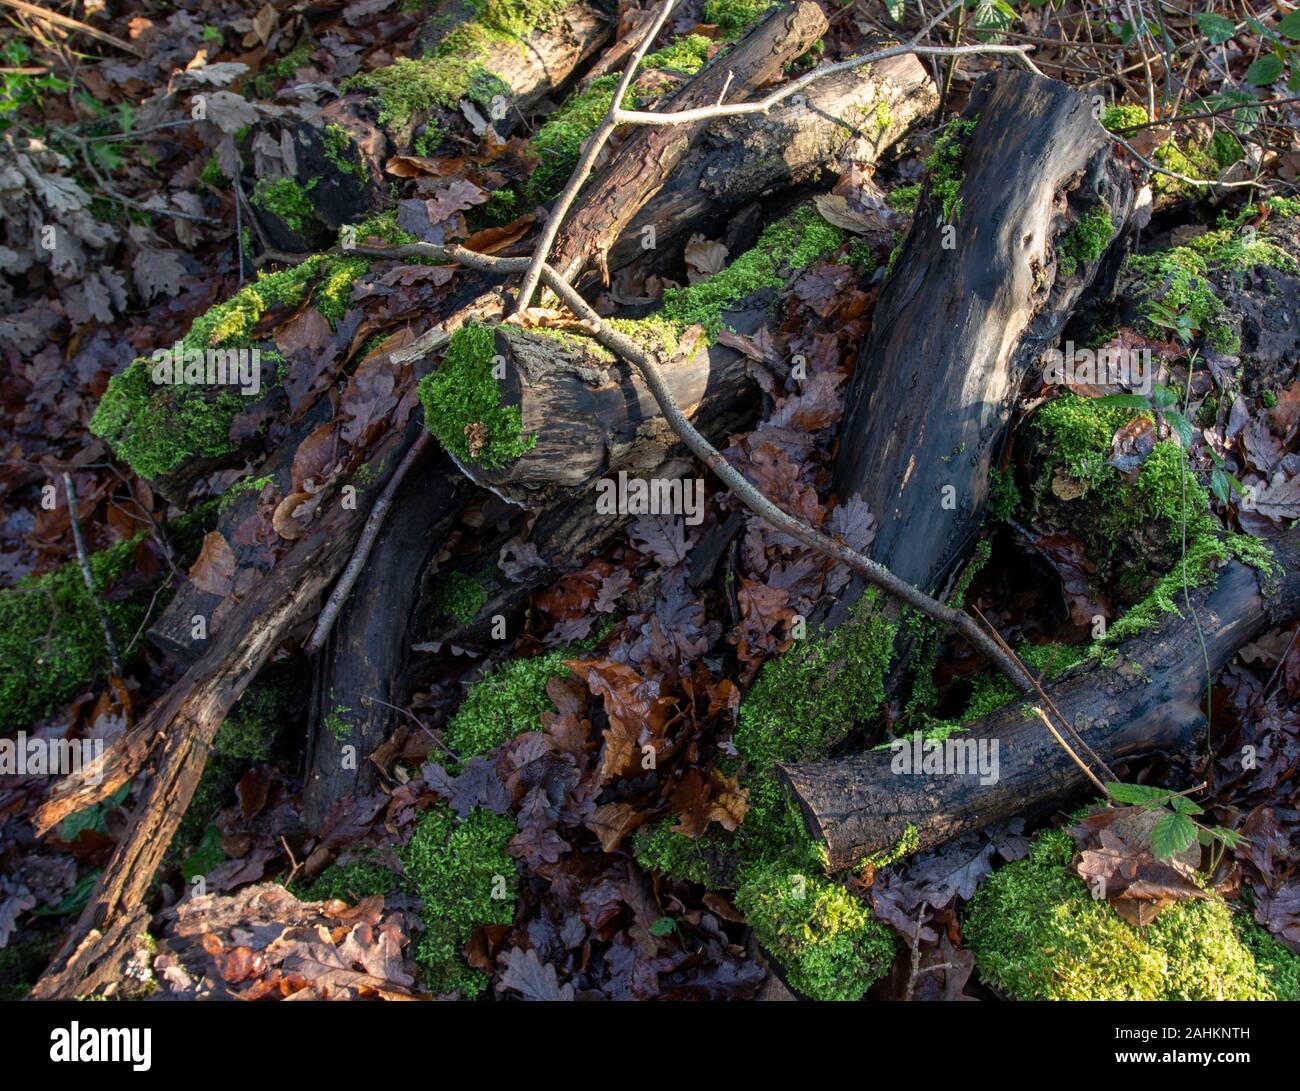 Abstract close-up natural portrait of wet cut branches part covered in moss, London, England, United Kingdom, Europe Stock Photo